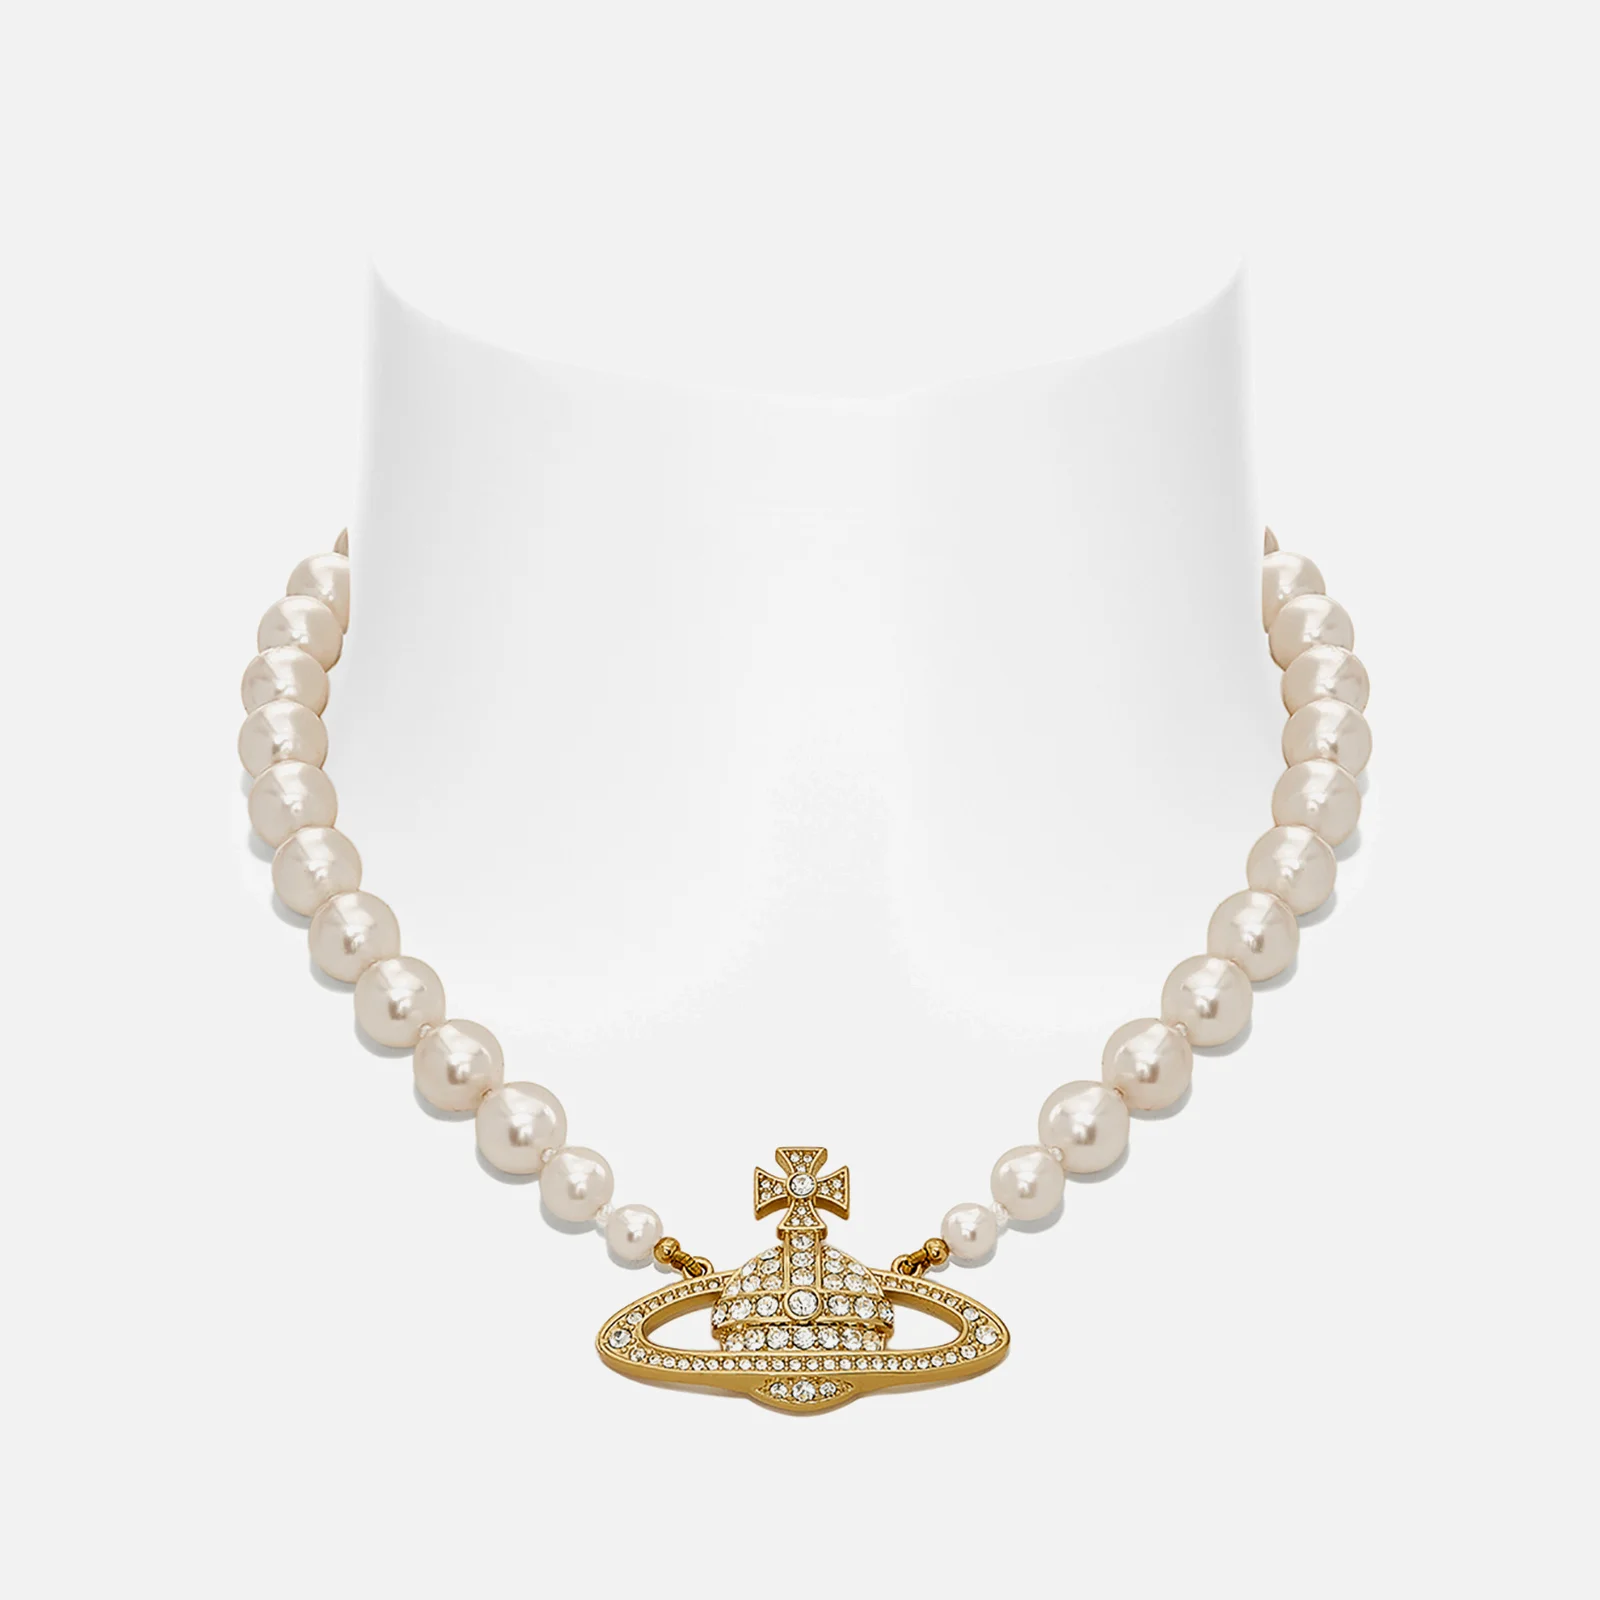 Vivienne Westwood Bas Relief Gold-Tone, Faux Pearl and Crystal Choker Image 1